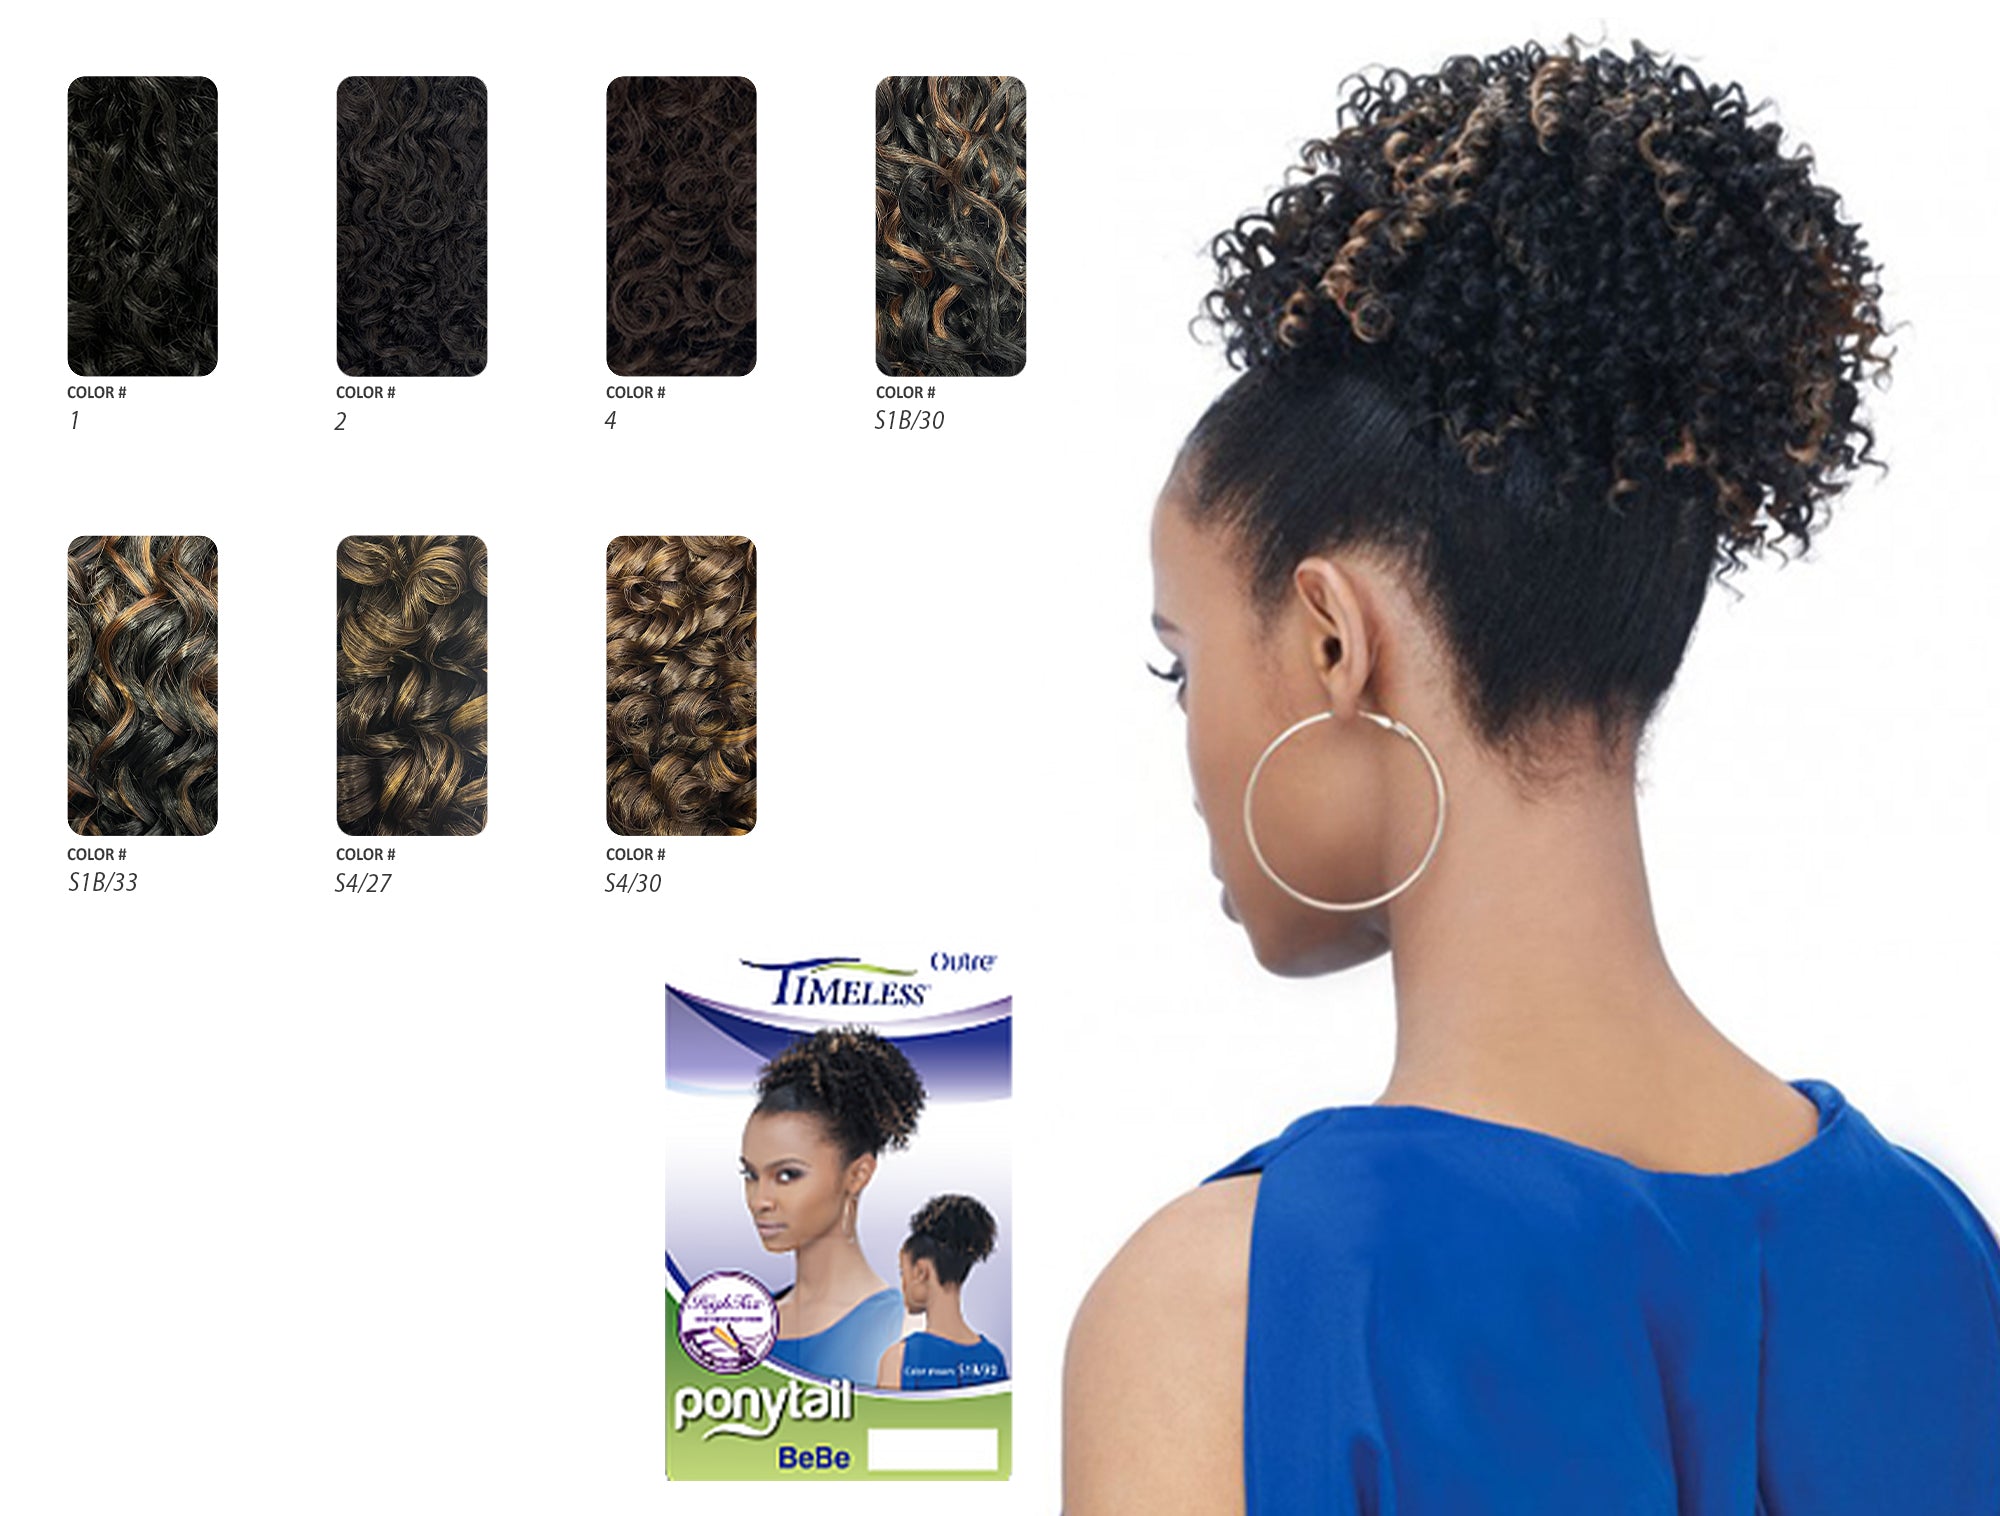 OUTRE SYNTHETIC PONYTAIL TIMELESS BEBE